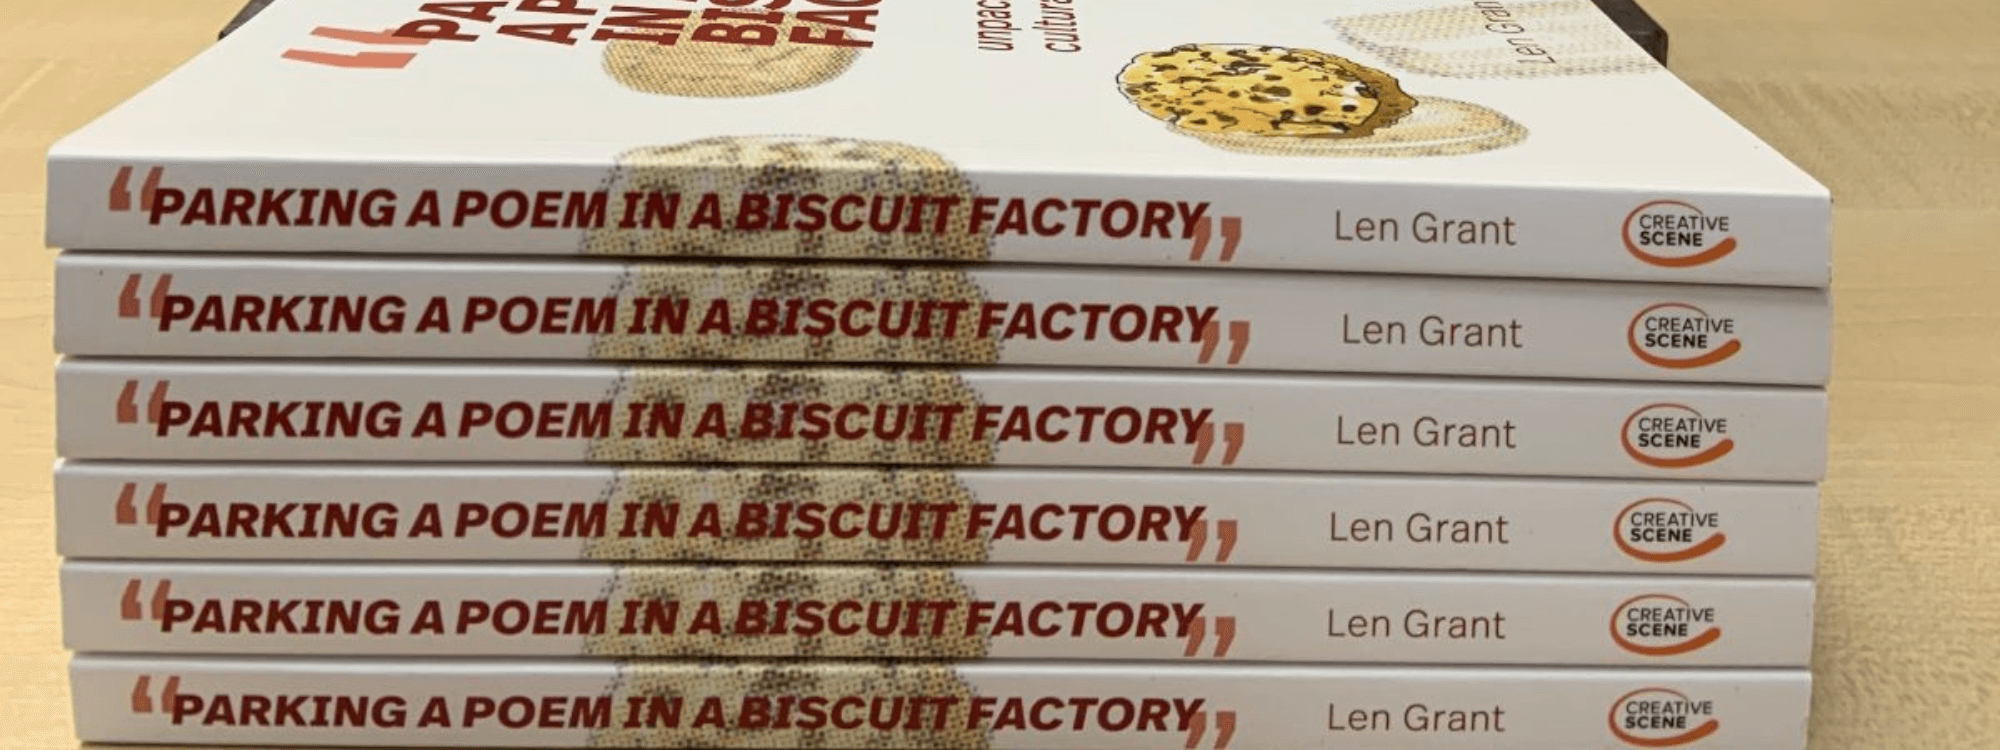 Parking a Poem in a Biscuit Factory